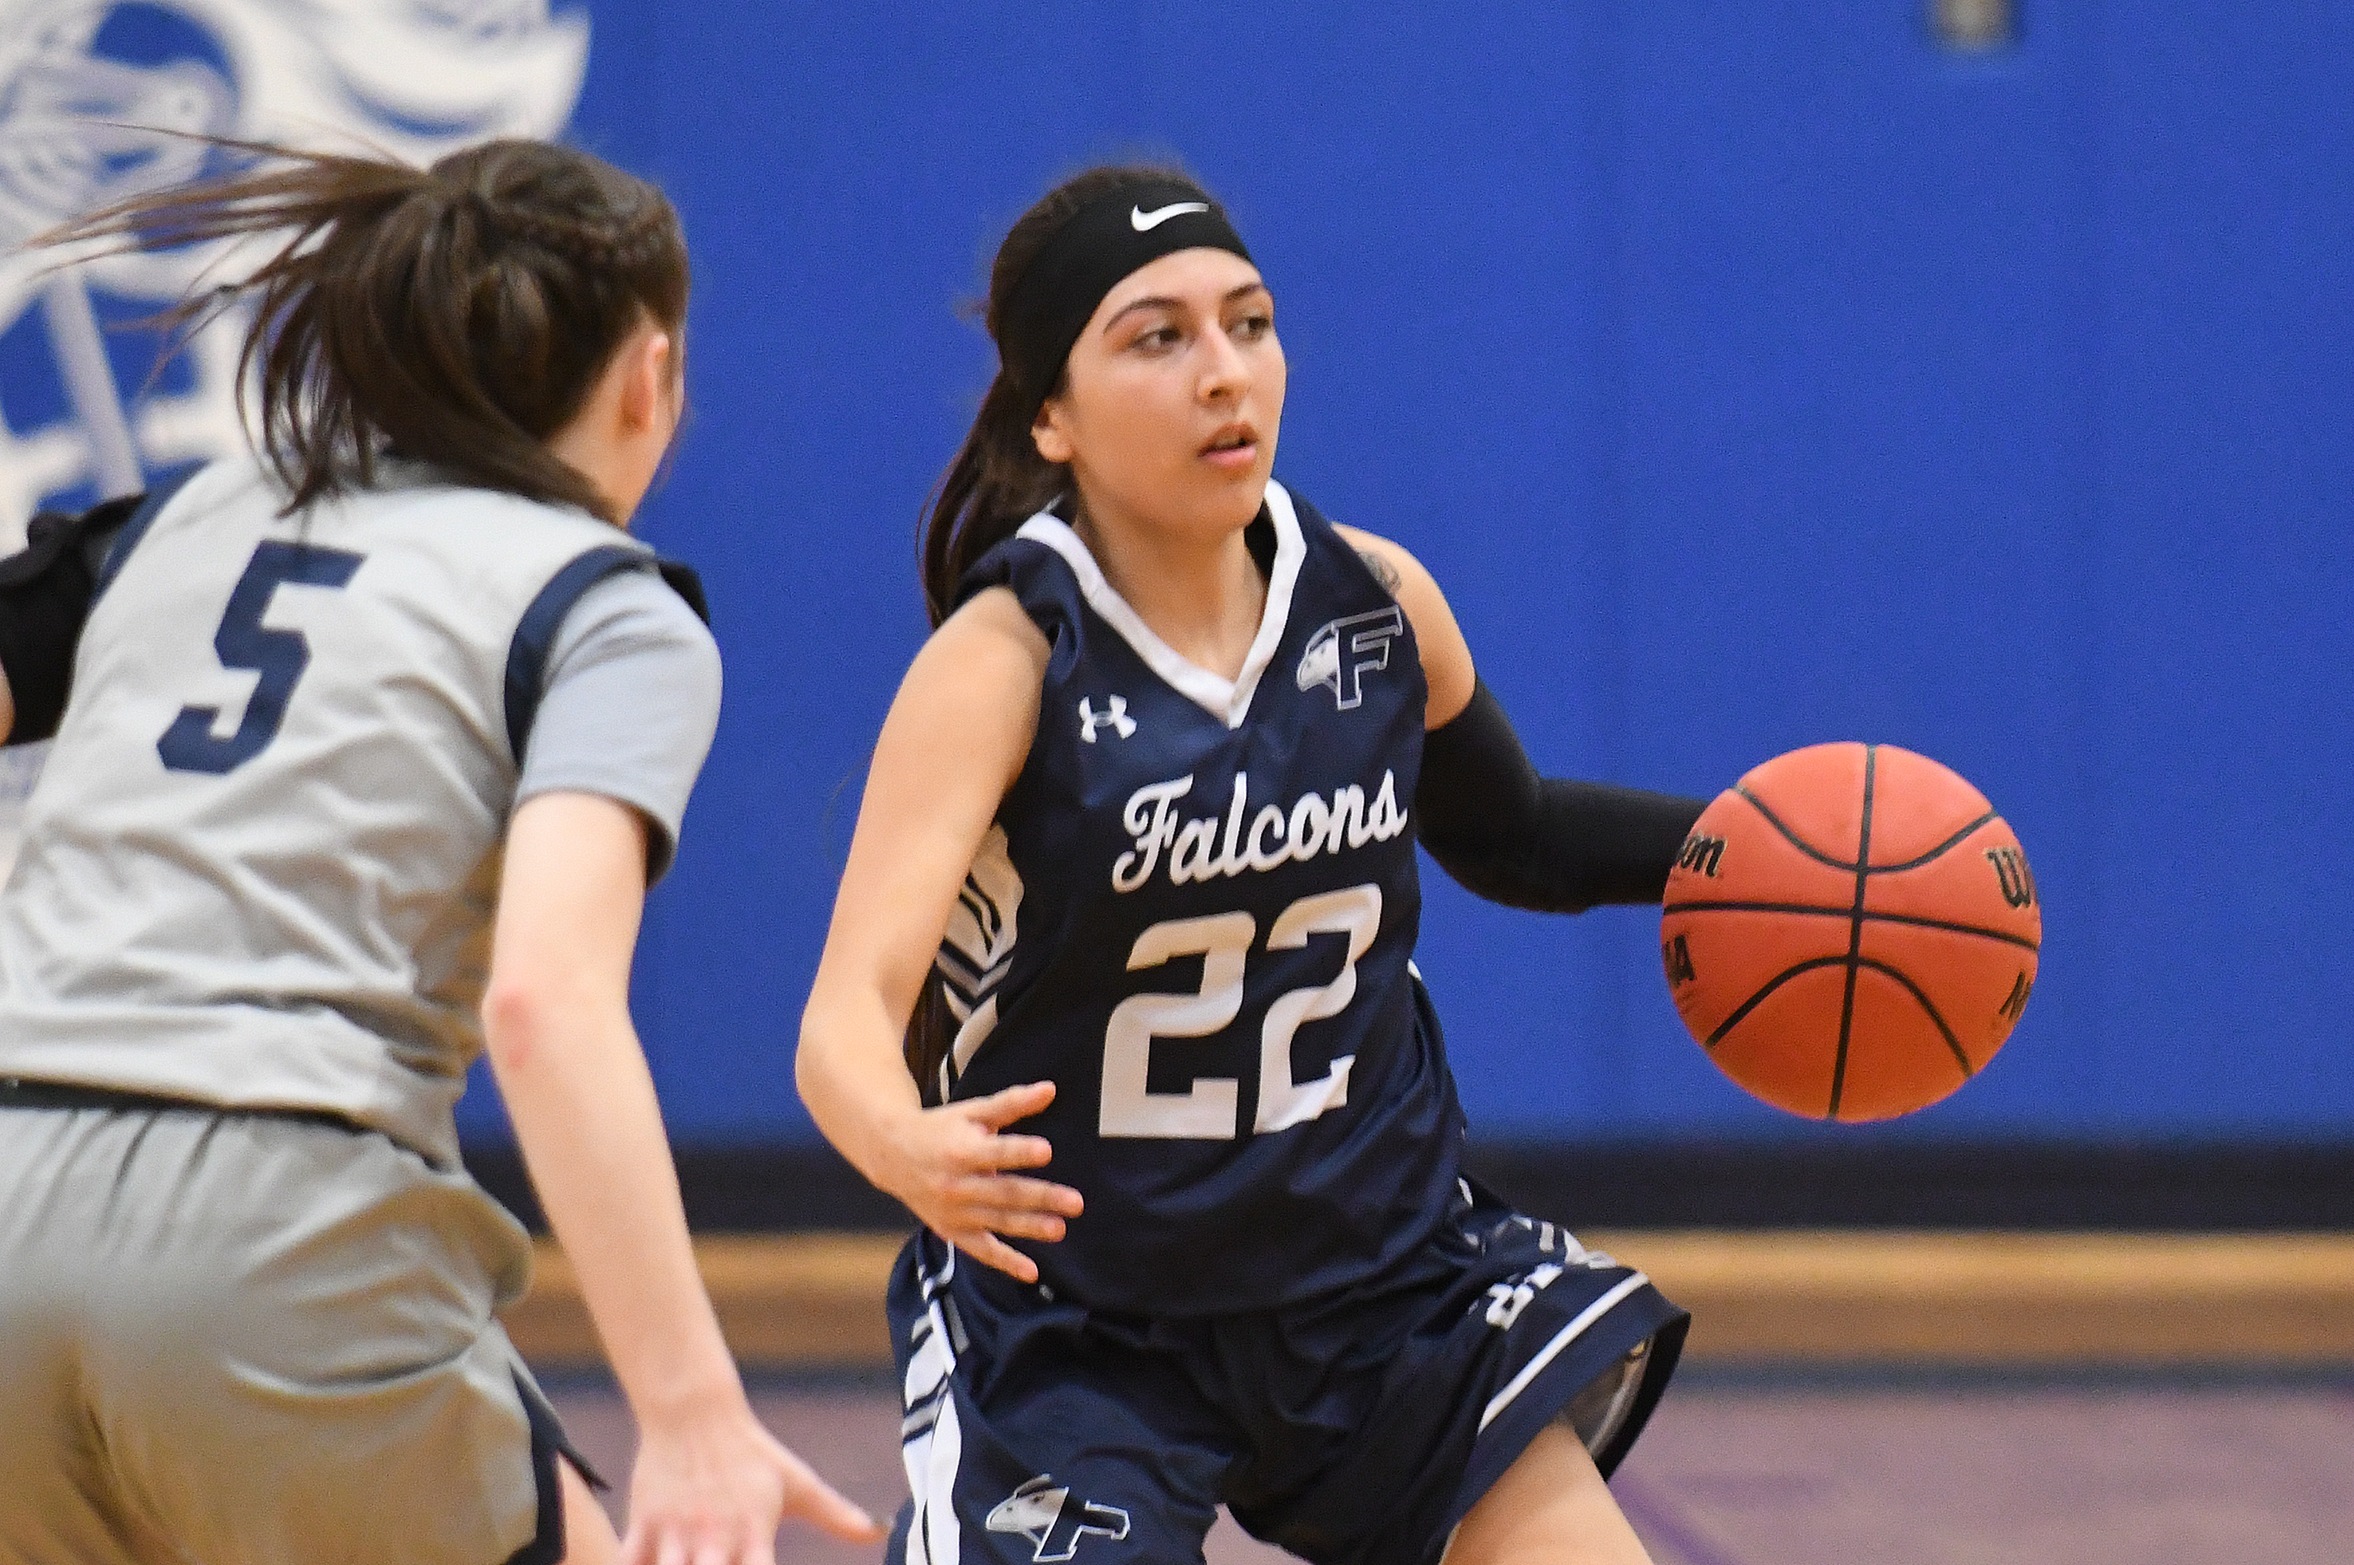 Women's Basketball: Falcons edge out UMFK, 69-60